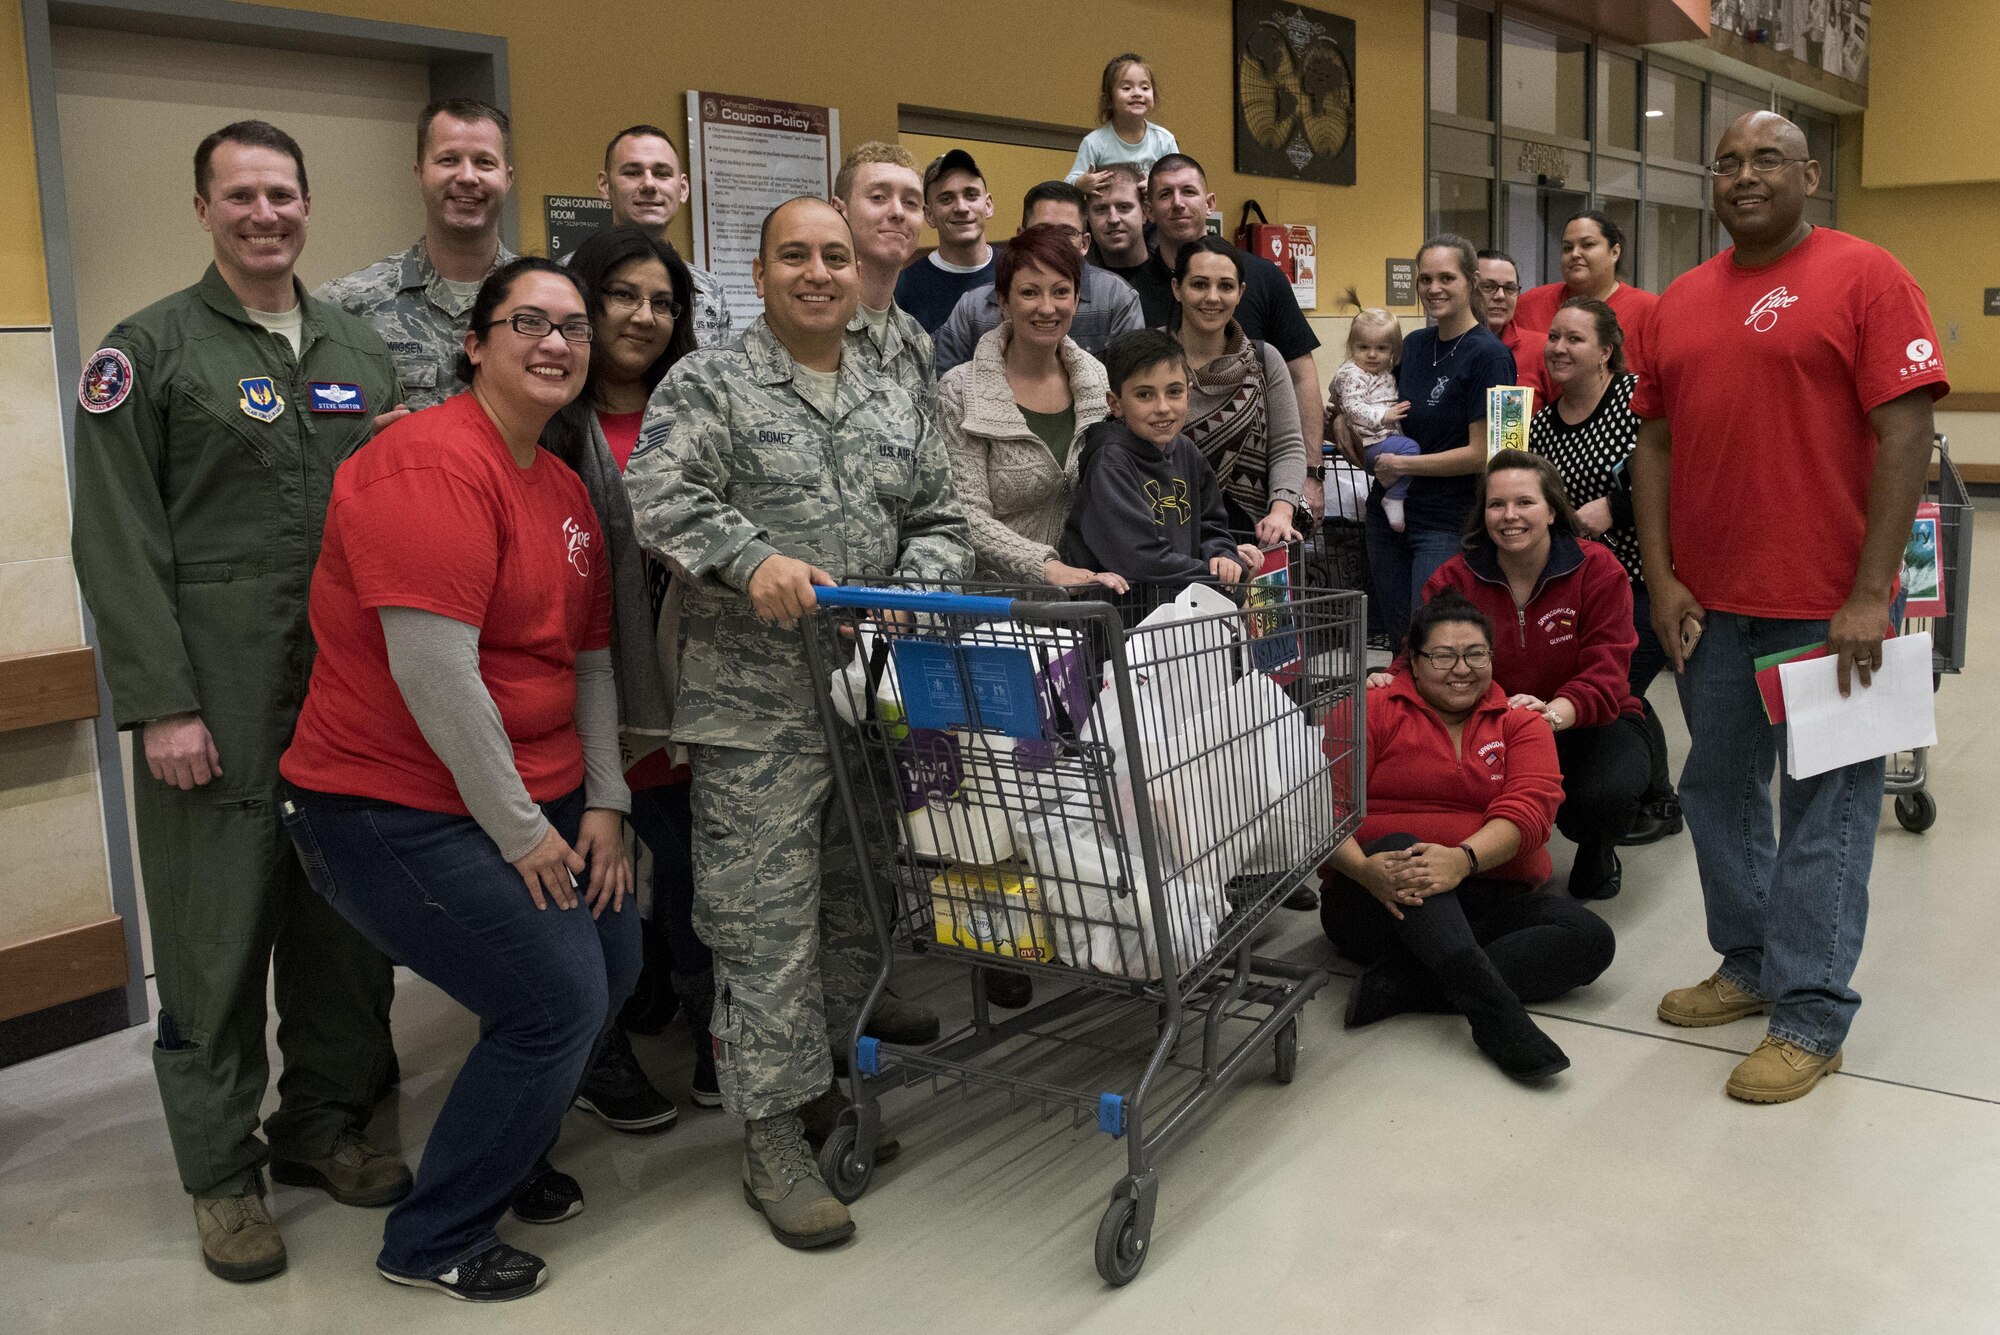 Members of Spangdahlem pose during the Spangdahlem Spouses and Enlisted Members Club Commissary Sweep at Spangdahlem Air Base, Germany, Nov. 15, 2016. Leadership and Commissary customers watched as contestants guessed food item prices, answered riddles and shopped against the clock, without exceeding their given allowance, to win Commissary groceries and gift cards. (U.S. Air Force photo by Airman 1st Class Preston Cherry)